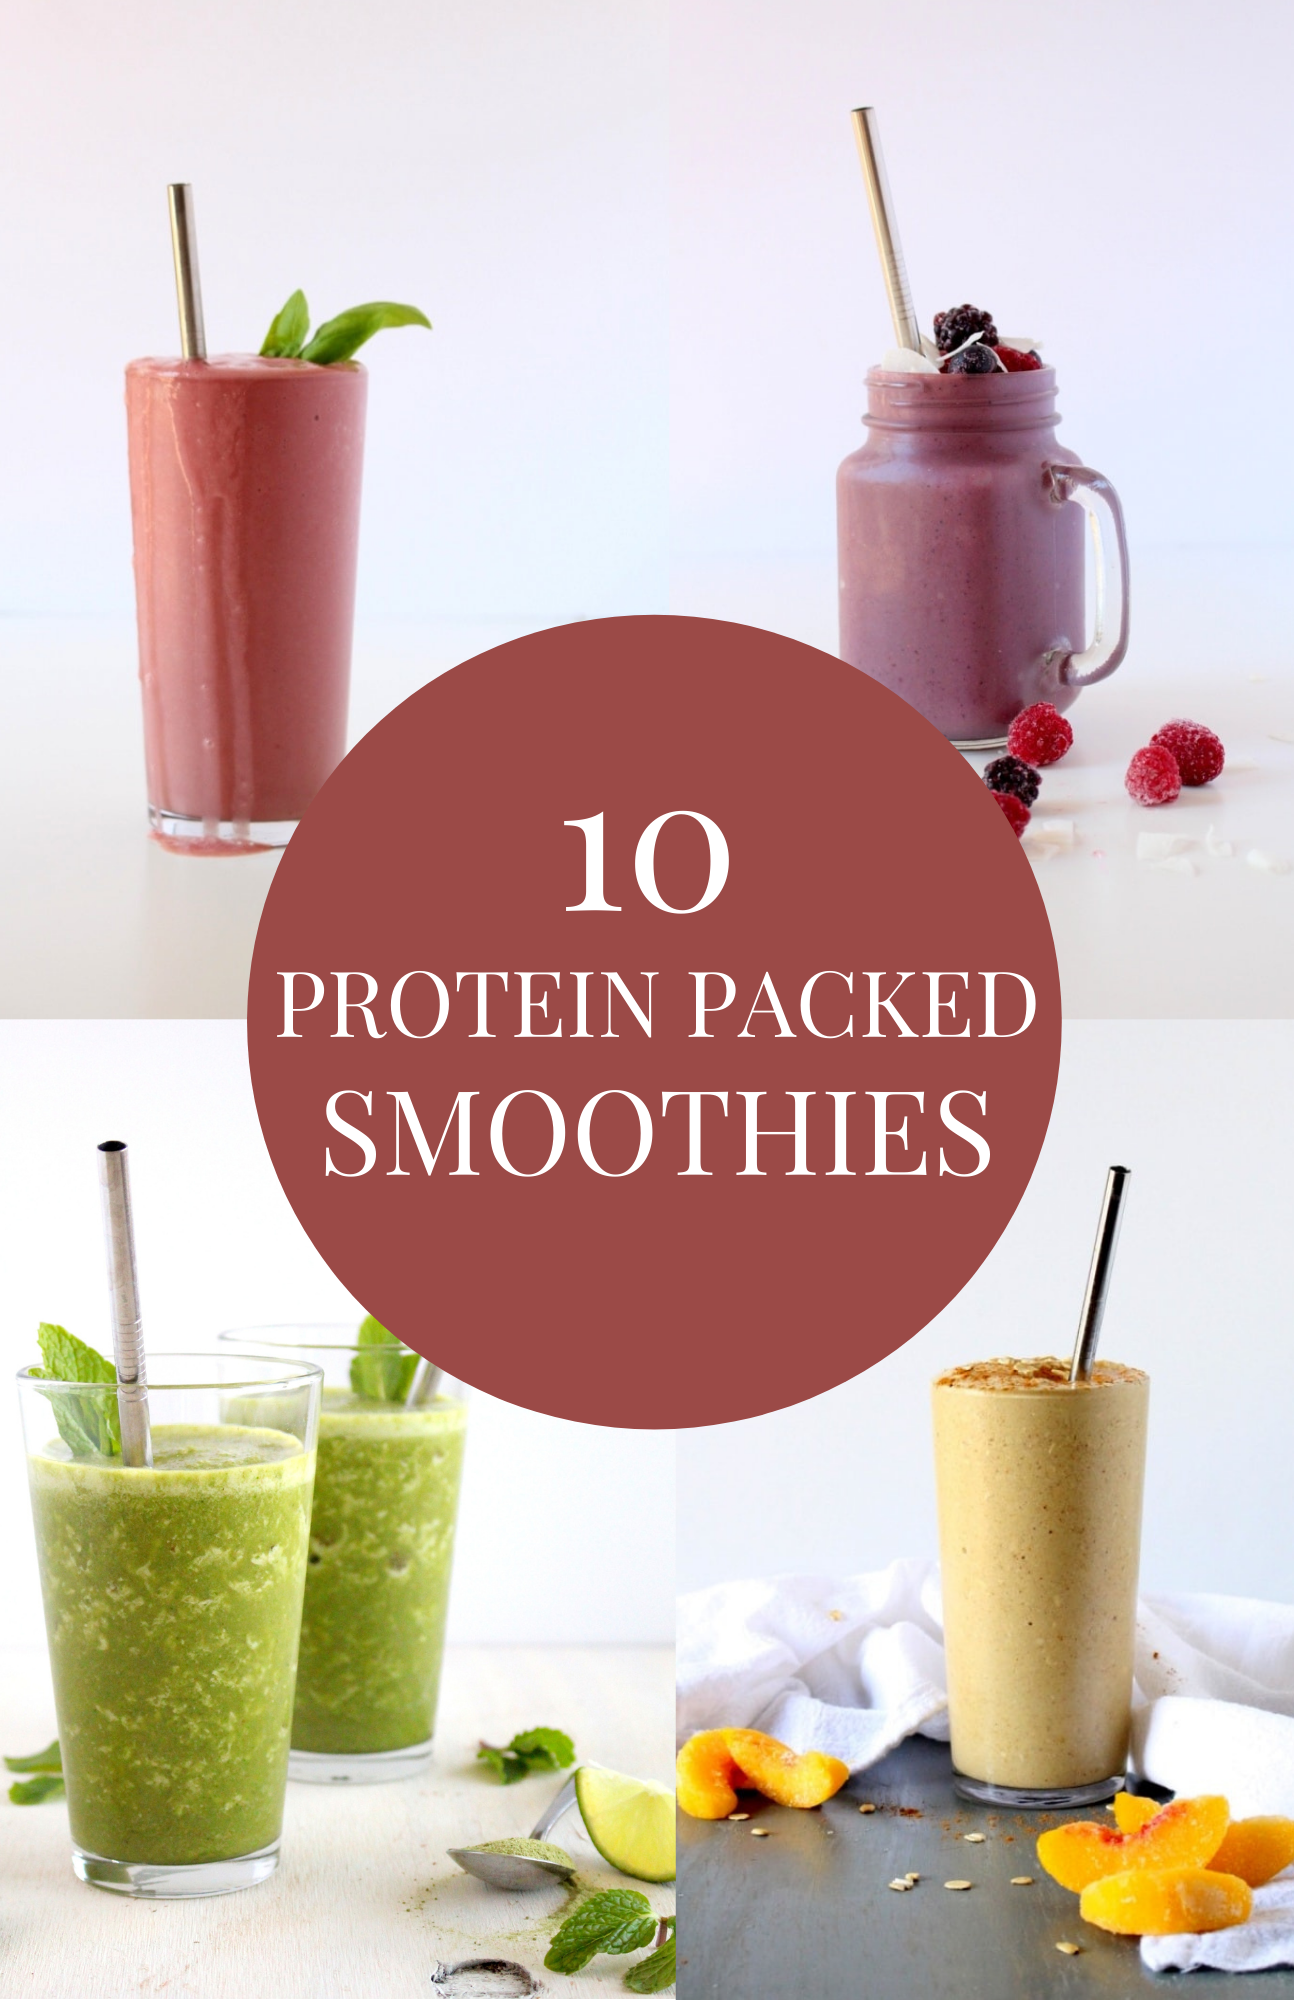 10 Protein Packed Smoothies